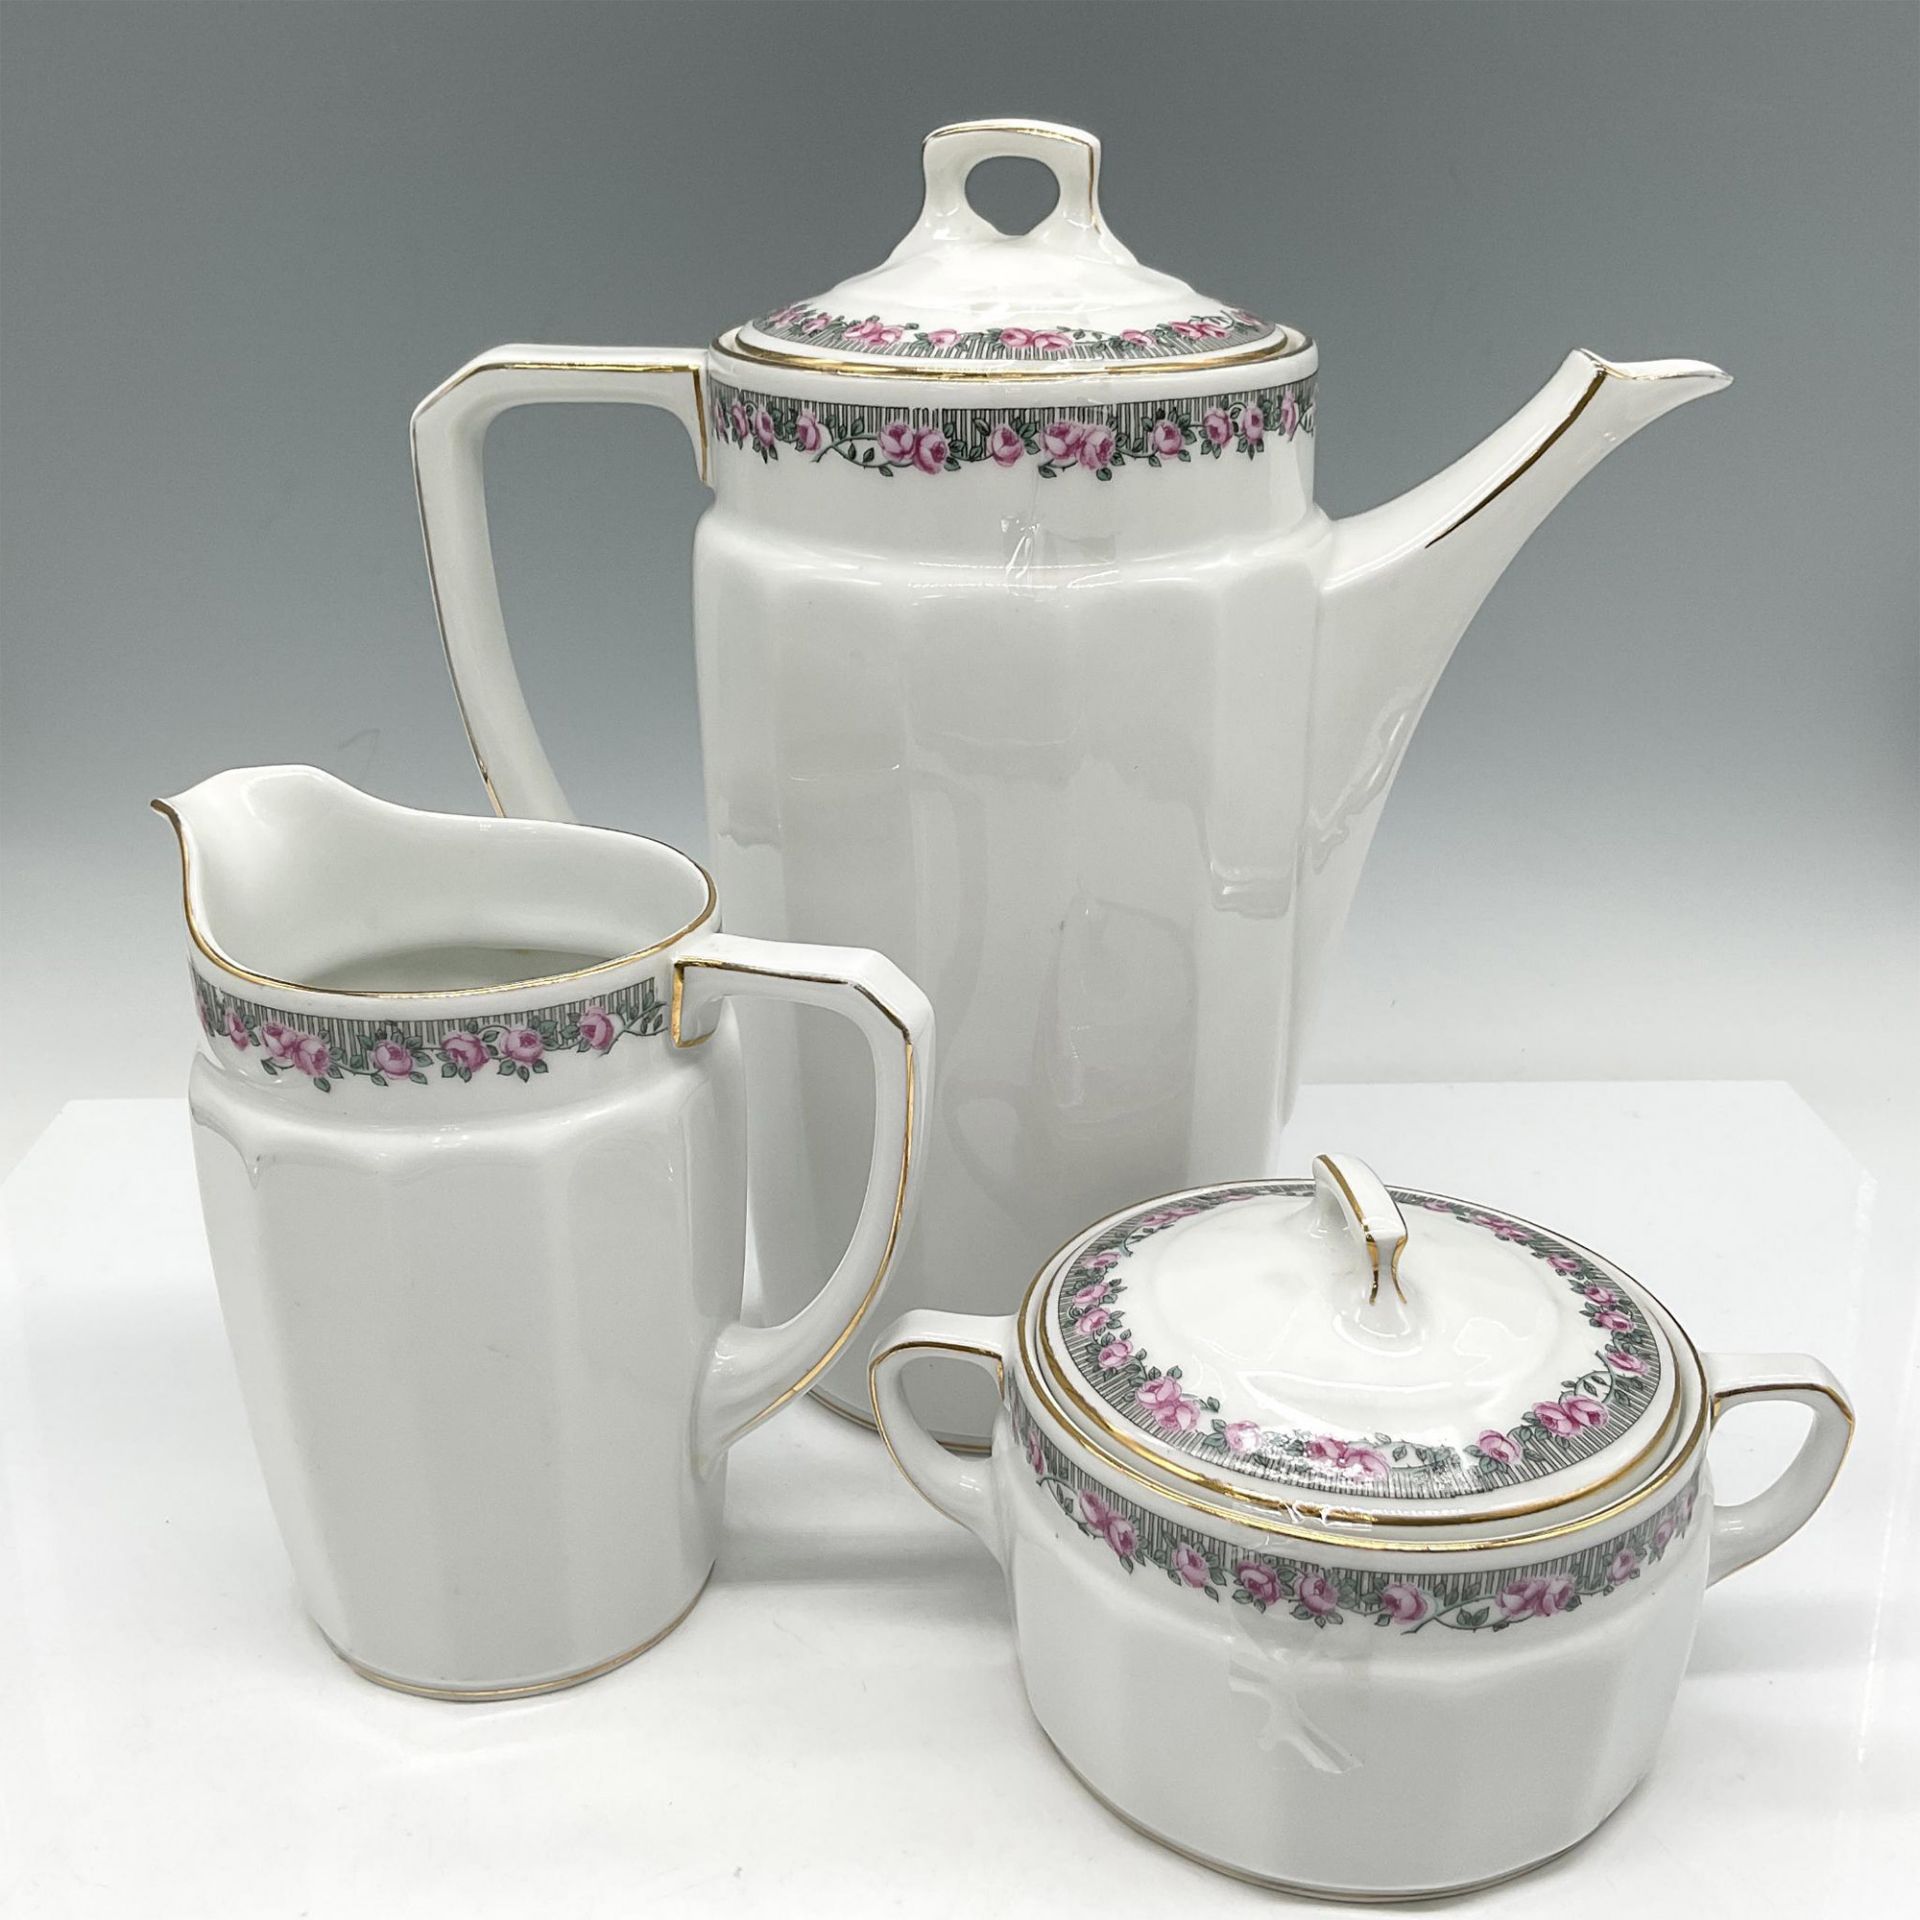 3pc Hutschenreuther Porcelain Coffee Service - Image 2 of 4